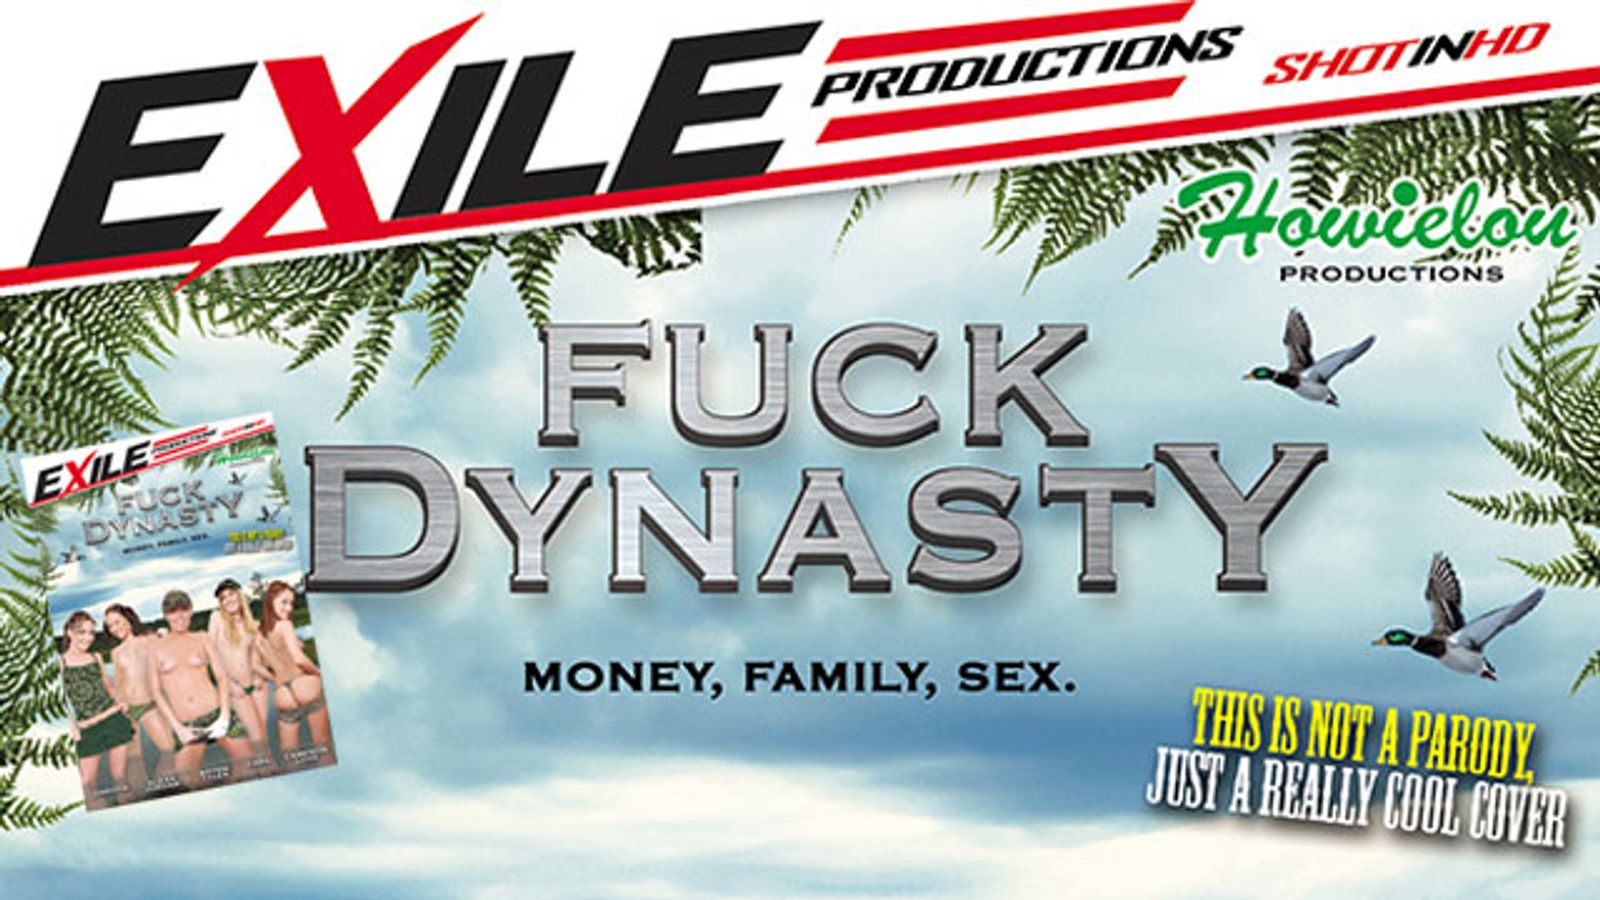 Exile Productions' 'Fuck Dynasty' Streets Thursday